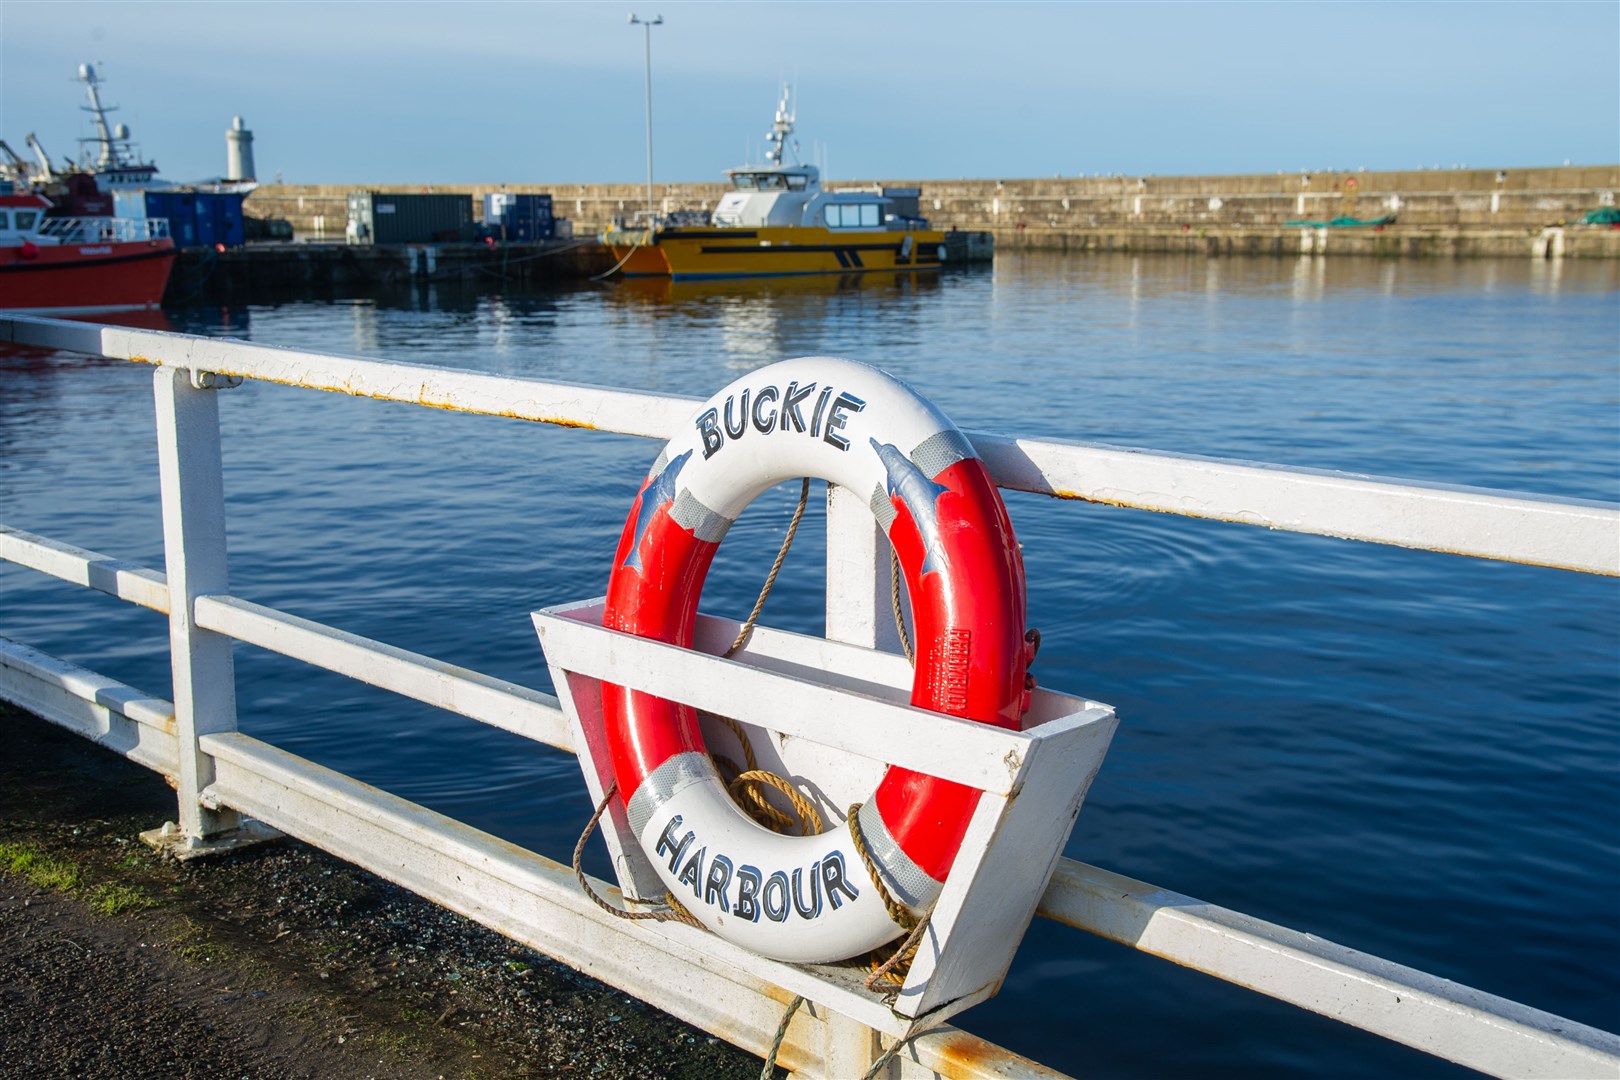 The levels of fish landings at Buckie Harbour remained static. Picture: Daniel Forsyth